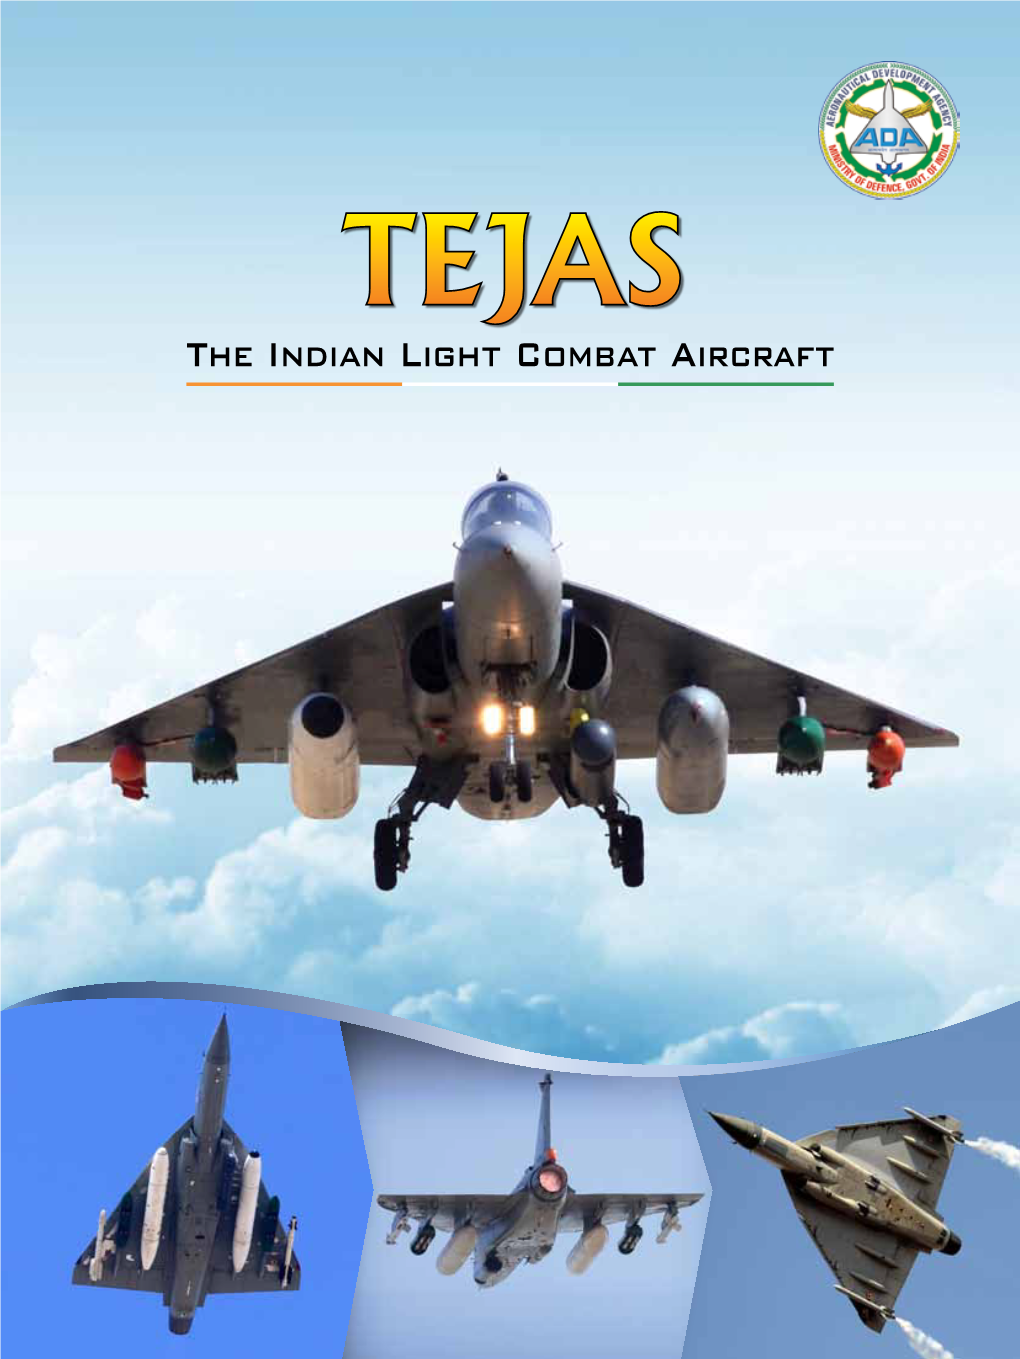 Tejas-Indian Light Combat Aircraft (LCA), Is the Smallest and Lightest Multi-Role Supersonic Fighter Aircraft of Its Class